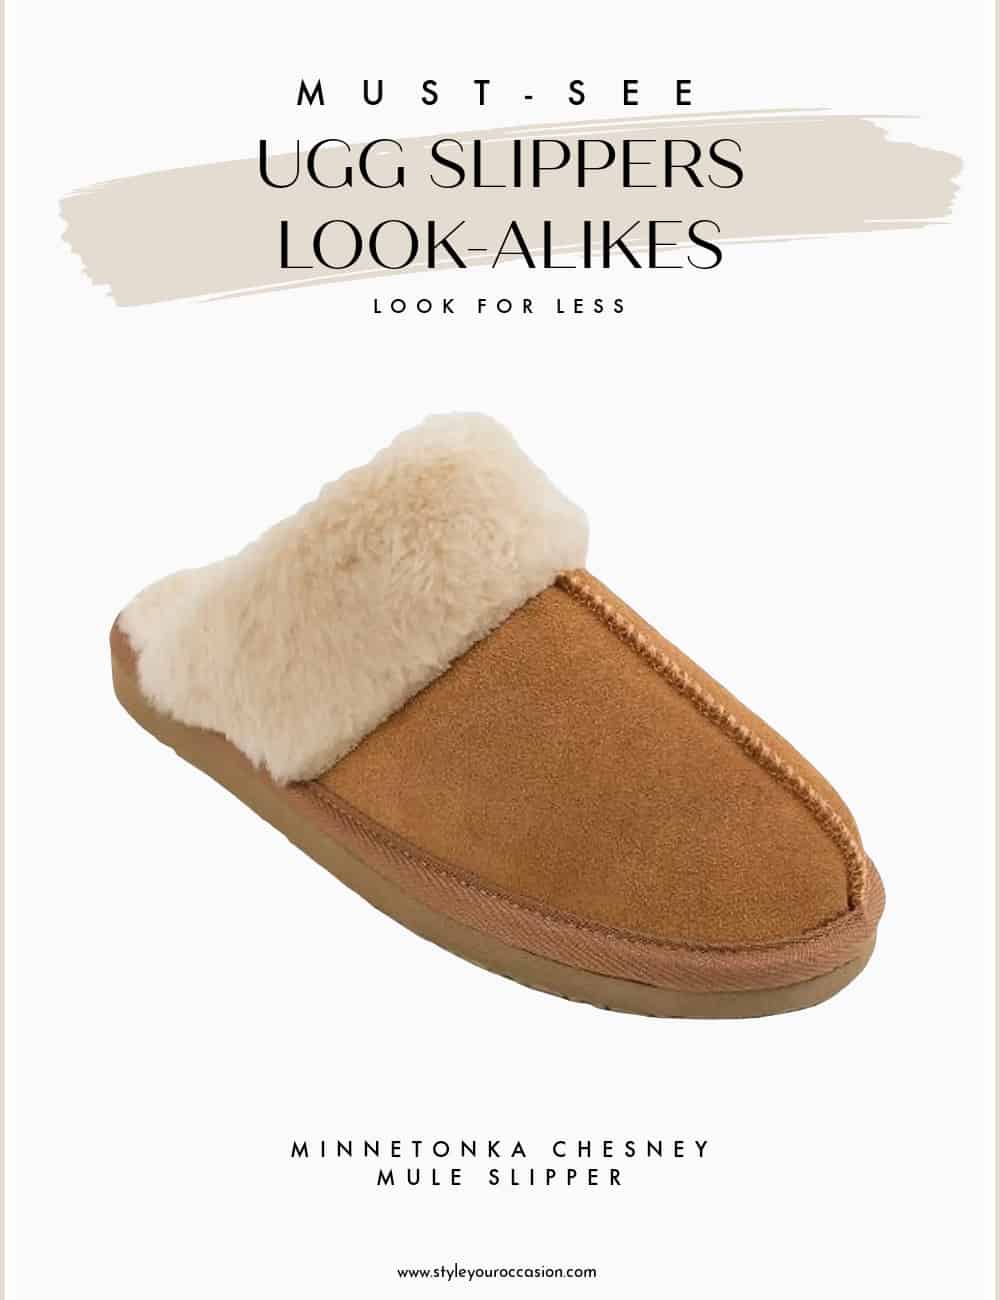 An image board of the Chesney mule slippers from Minnetonka as a dupe for Ugg Coquette slippers